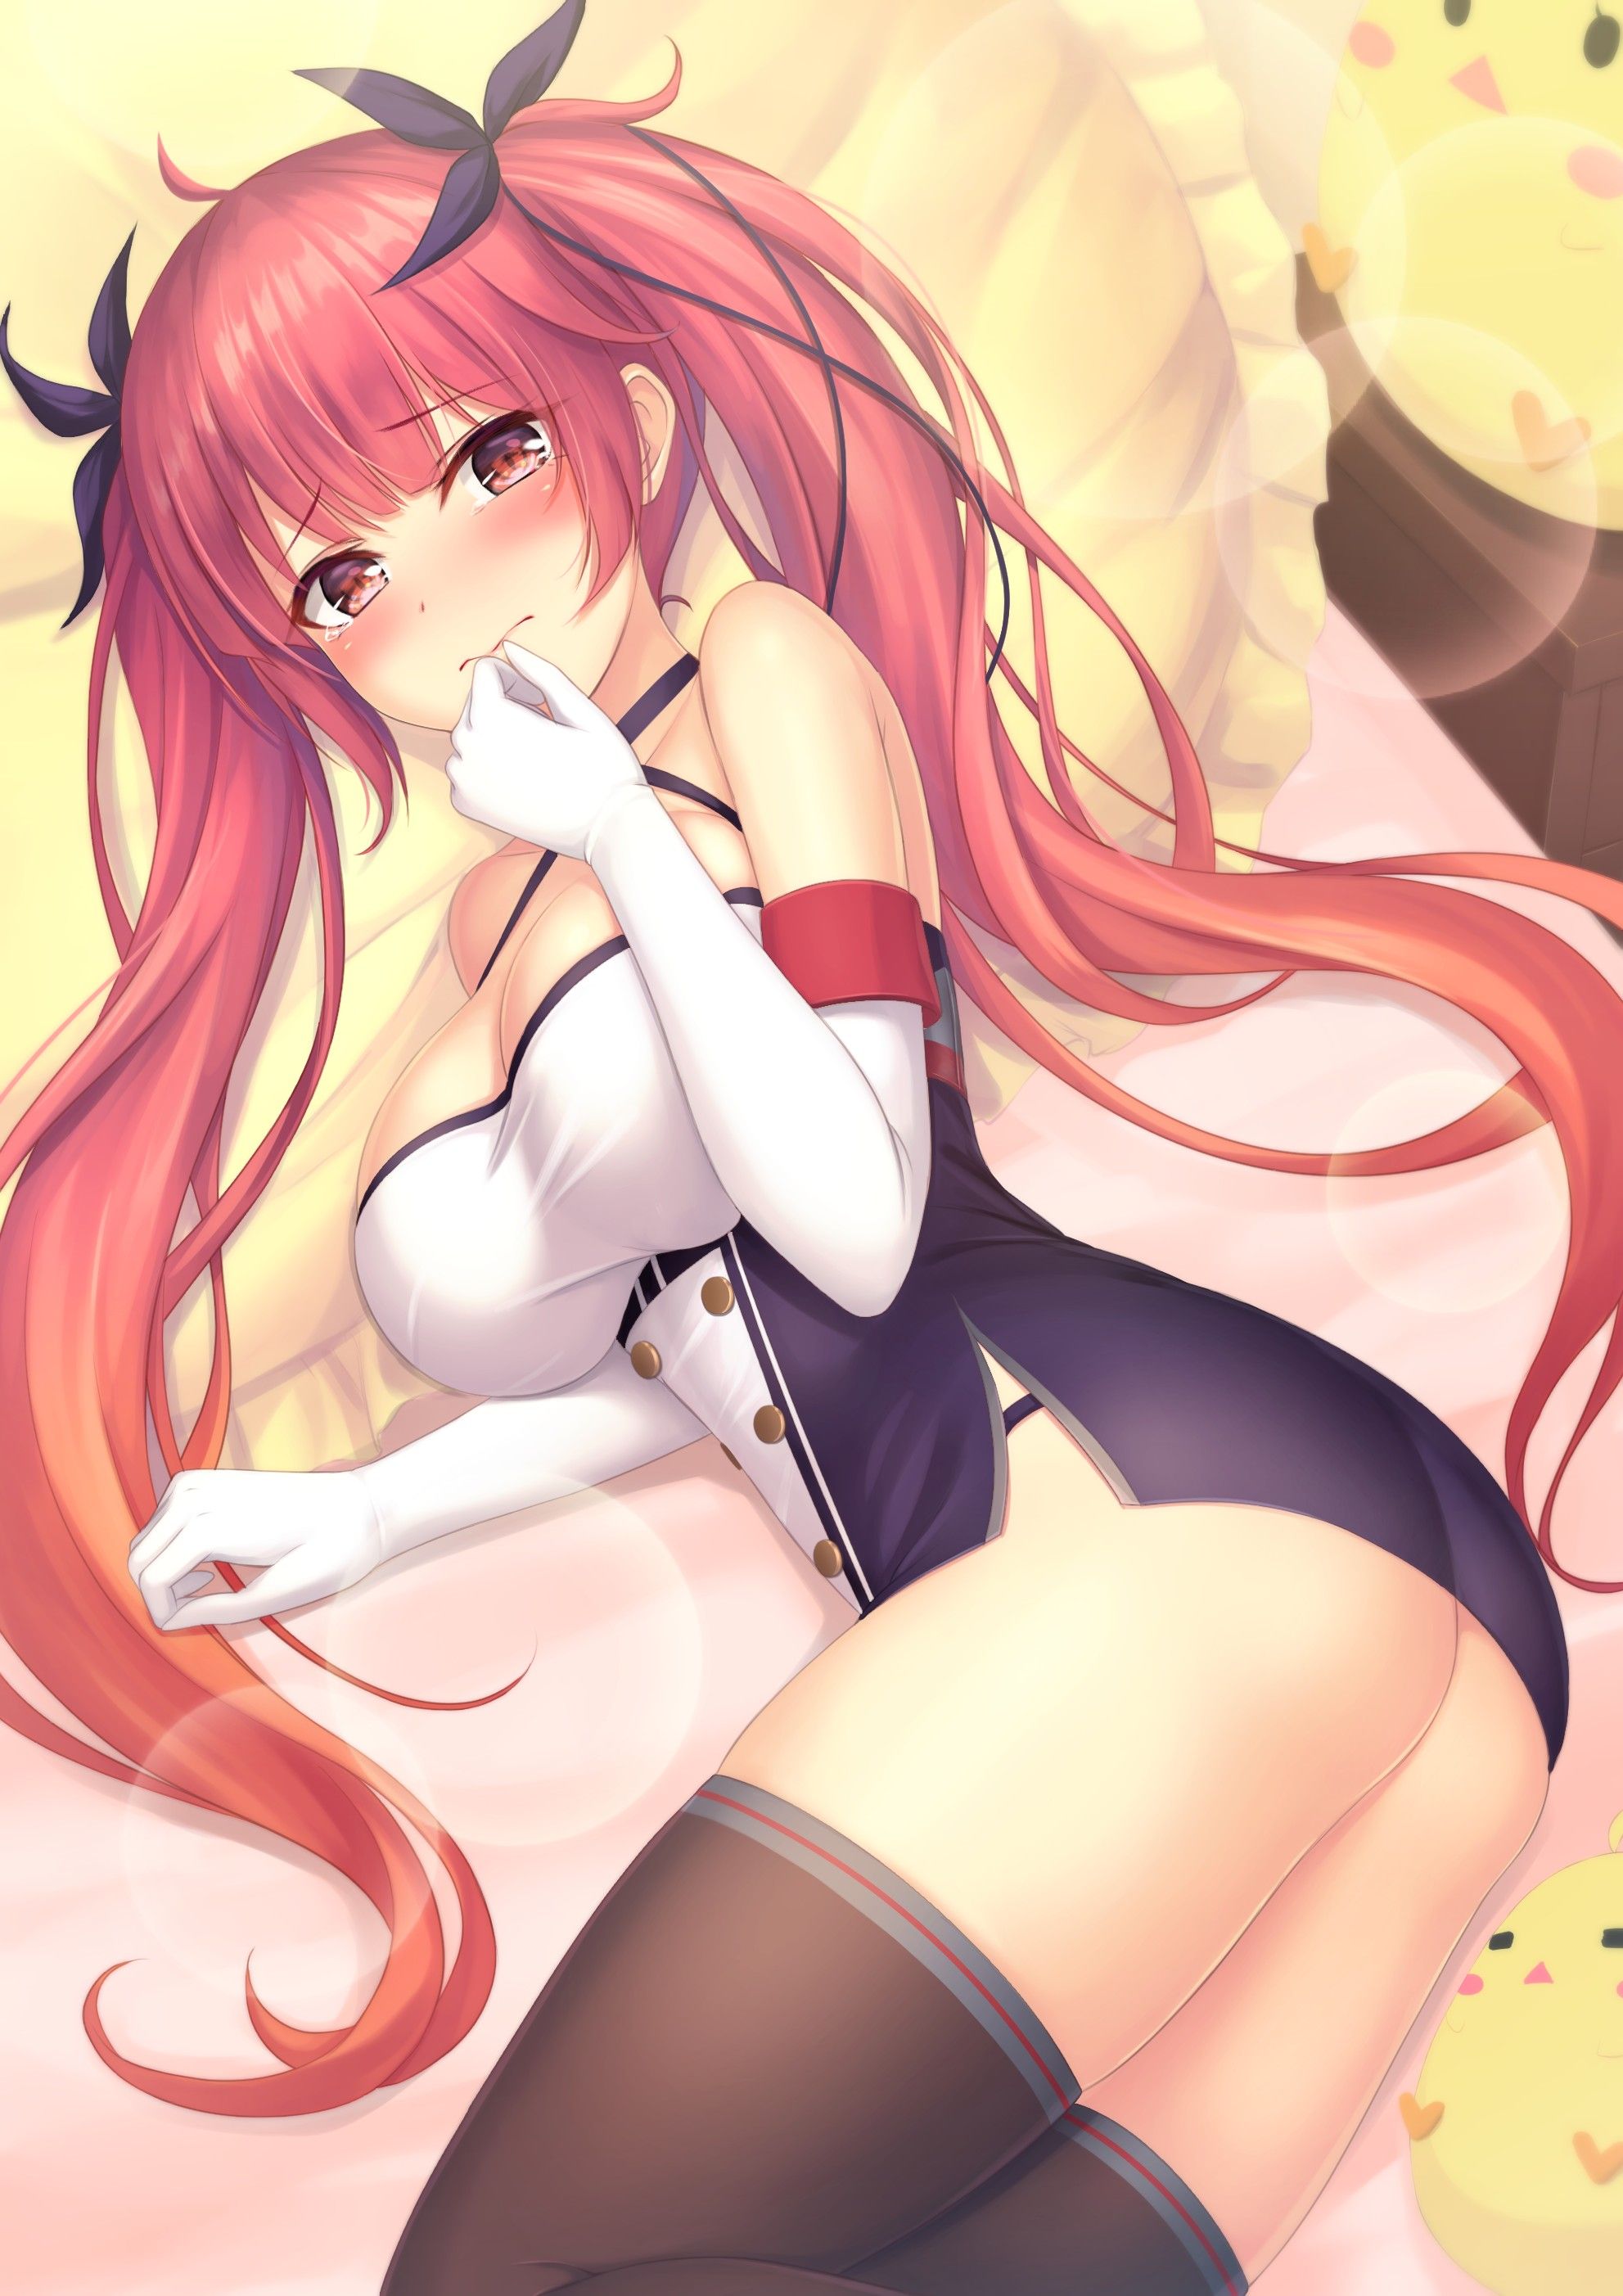 Secondary erotic erotic image of the body of the girl of twin tail is here 16